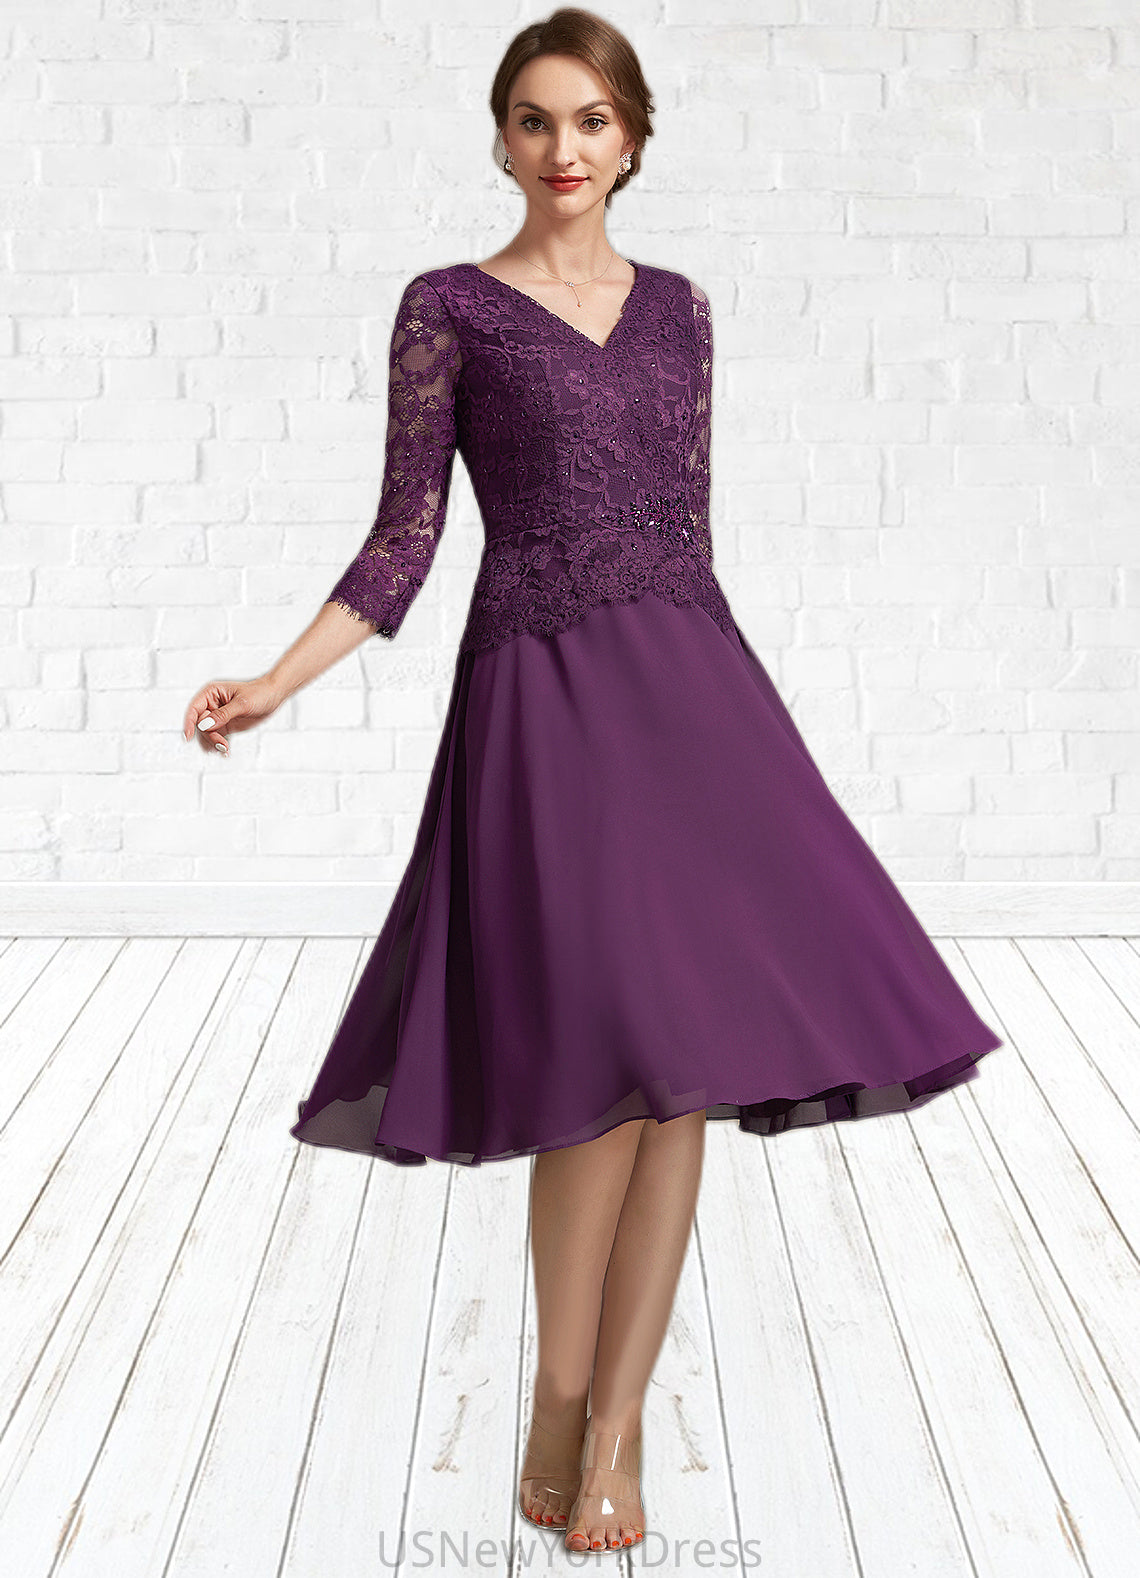 Maryjane A-Line V-neck Knee-Length Chiffon Lace Mother of the Bride Dress With Beading Sequins DJ126P0015035